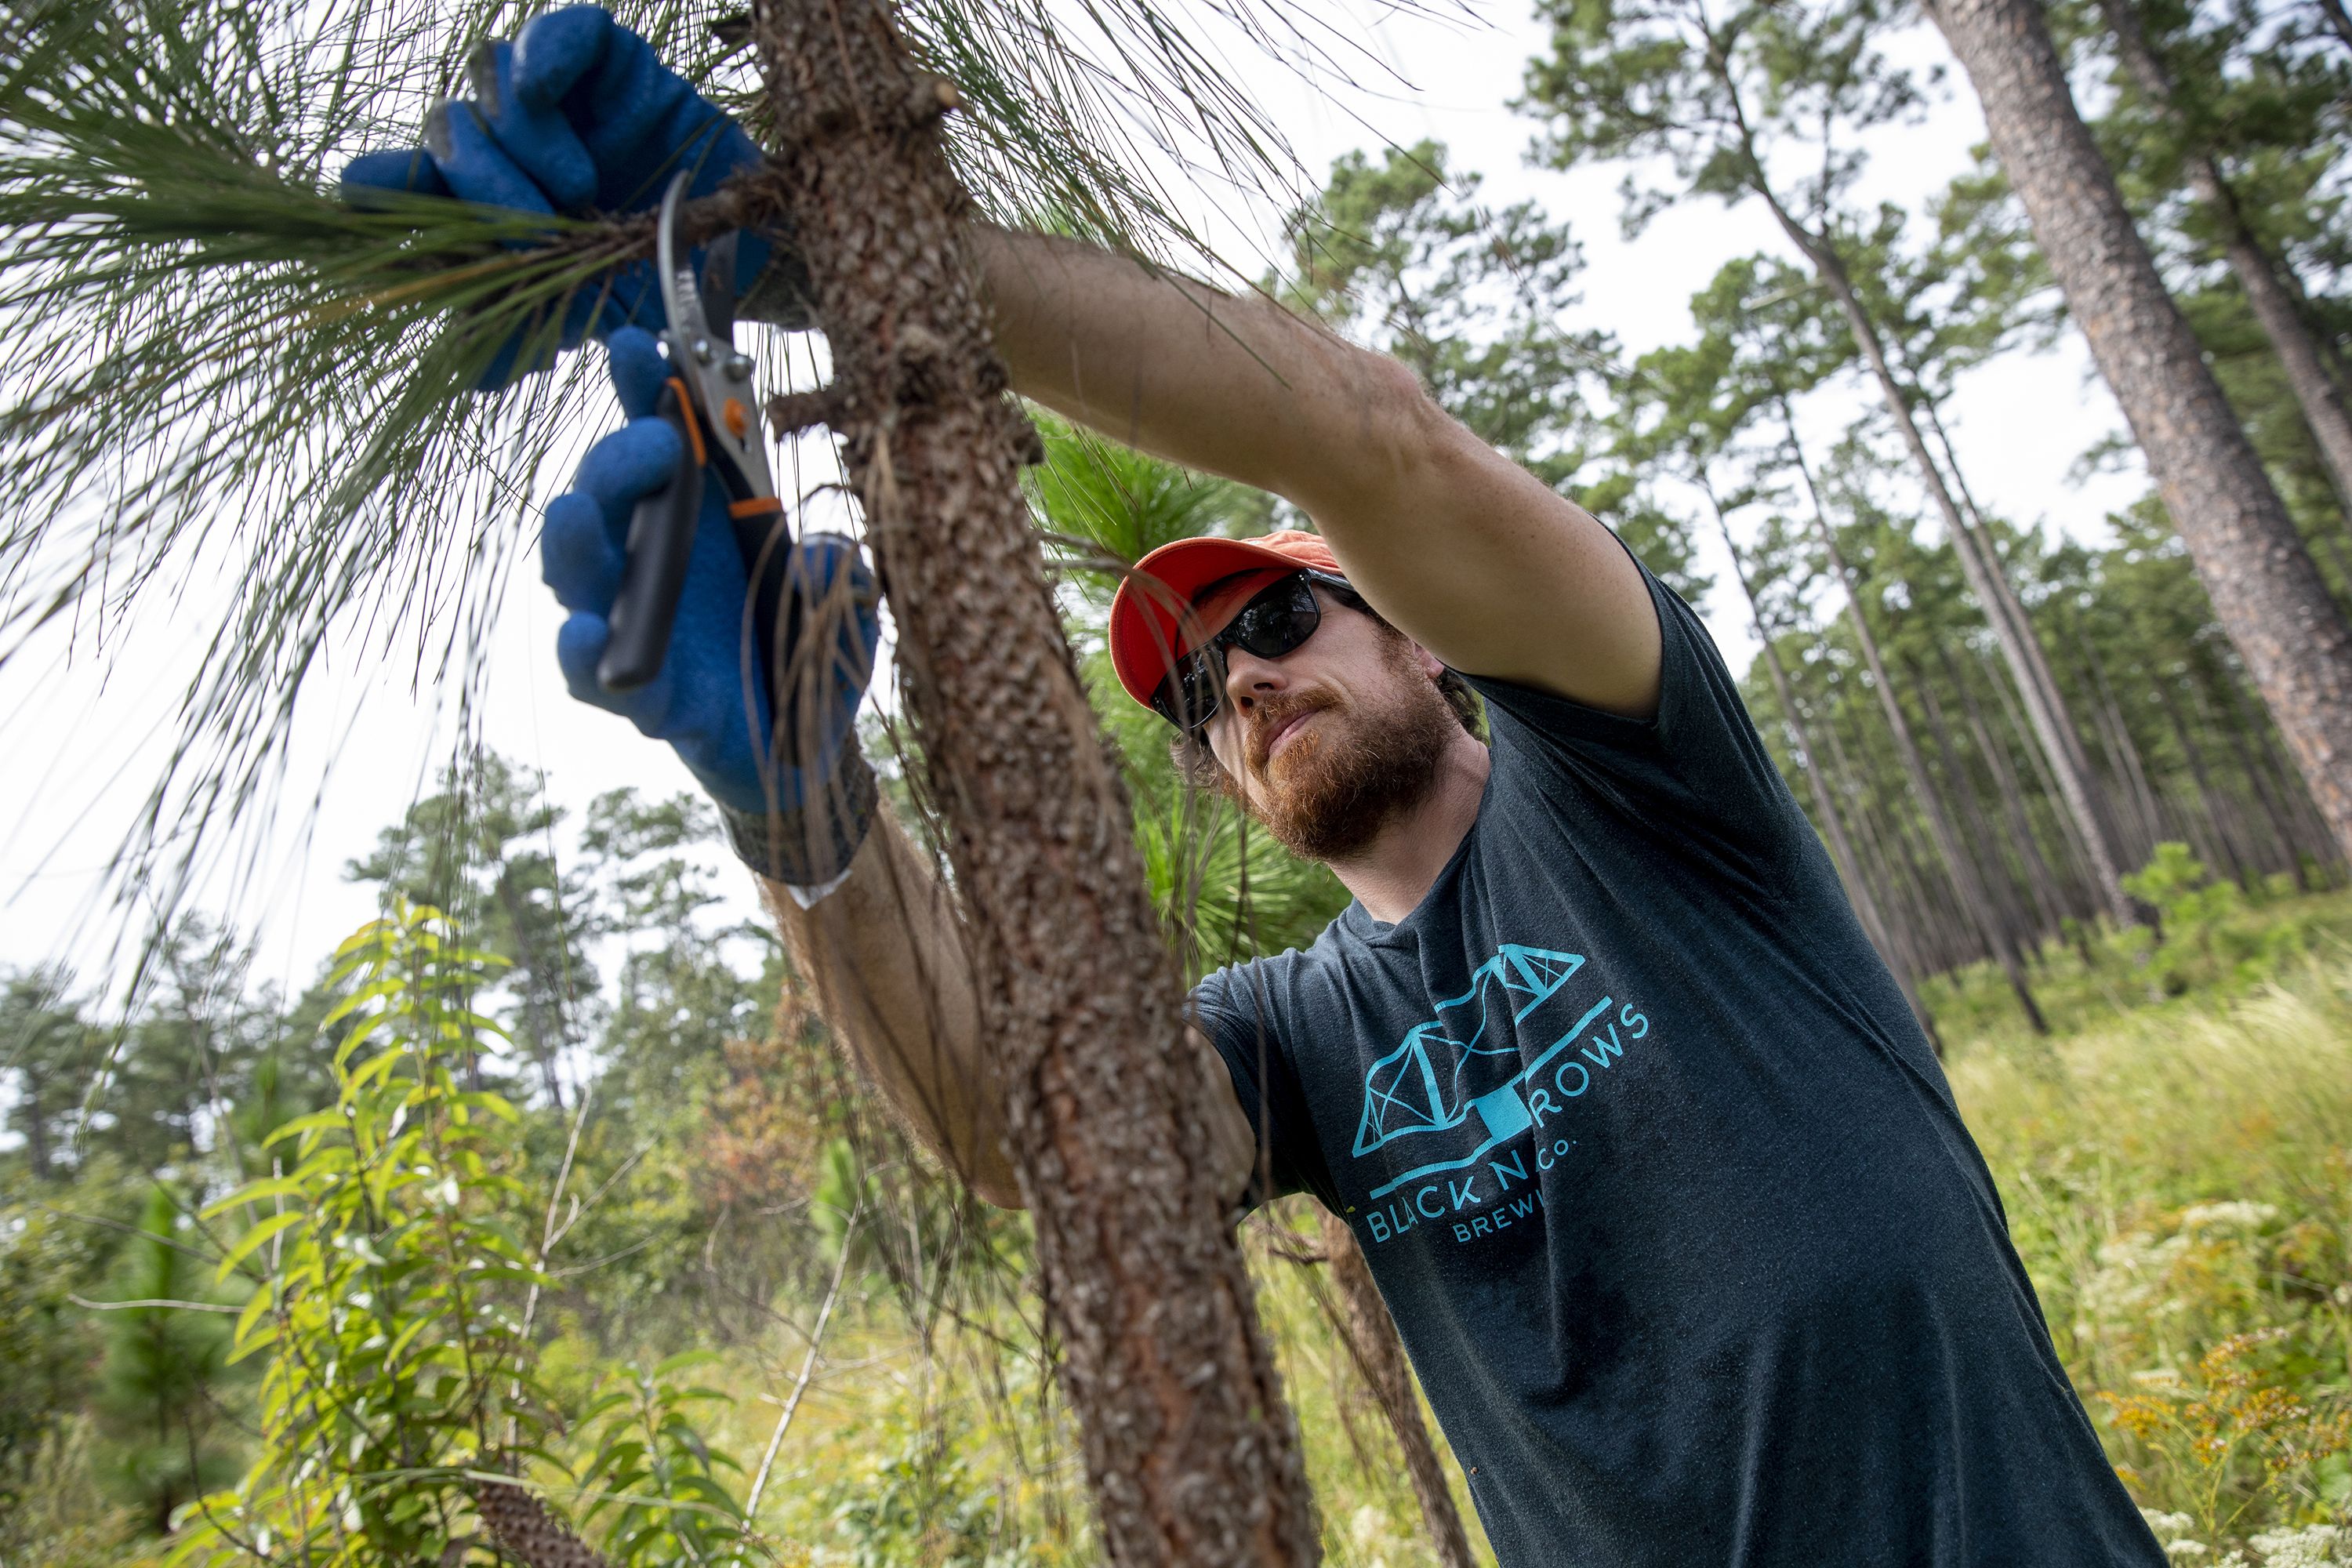 A man wearing a blue shirt holds a pine branch steady with one hand while he reaches up with the other to cut it close to the trunk of the tree. The open savanna behind him is lined with tall pines.